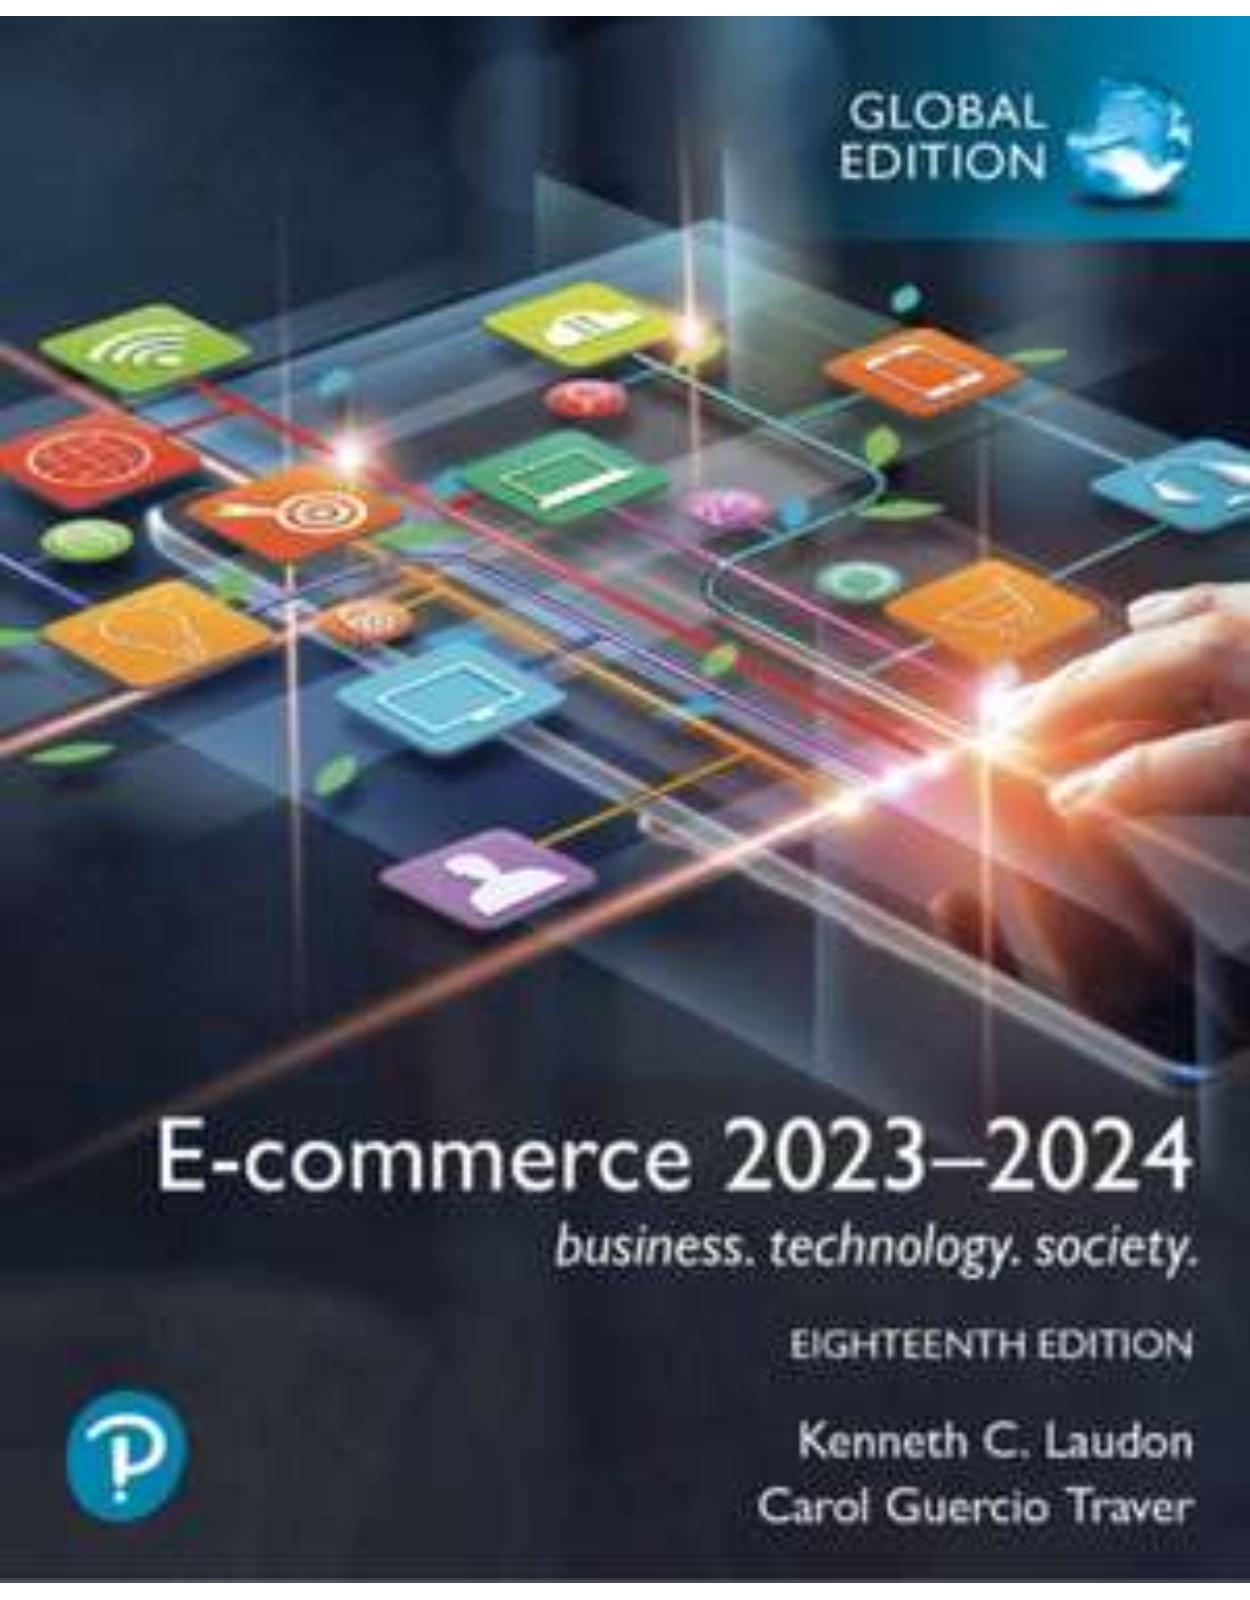 E-commerce 2023-2024: business. technology. society., Global Edition